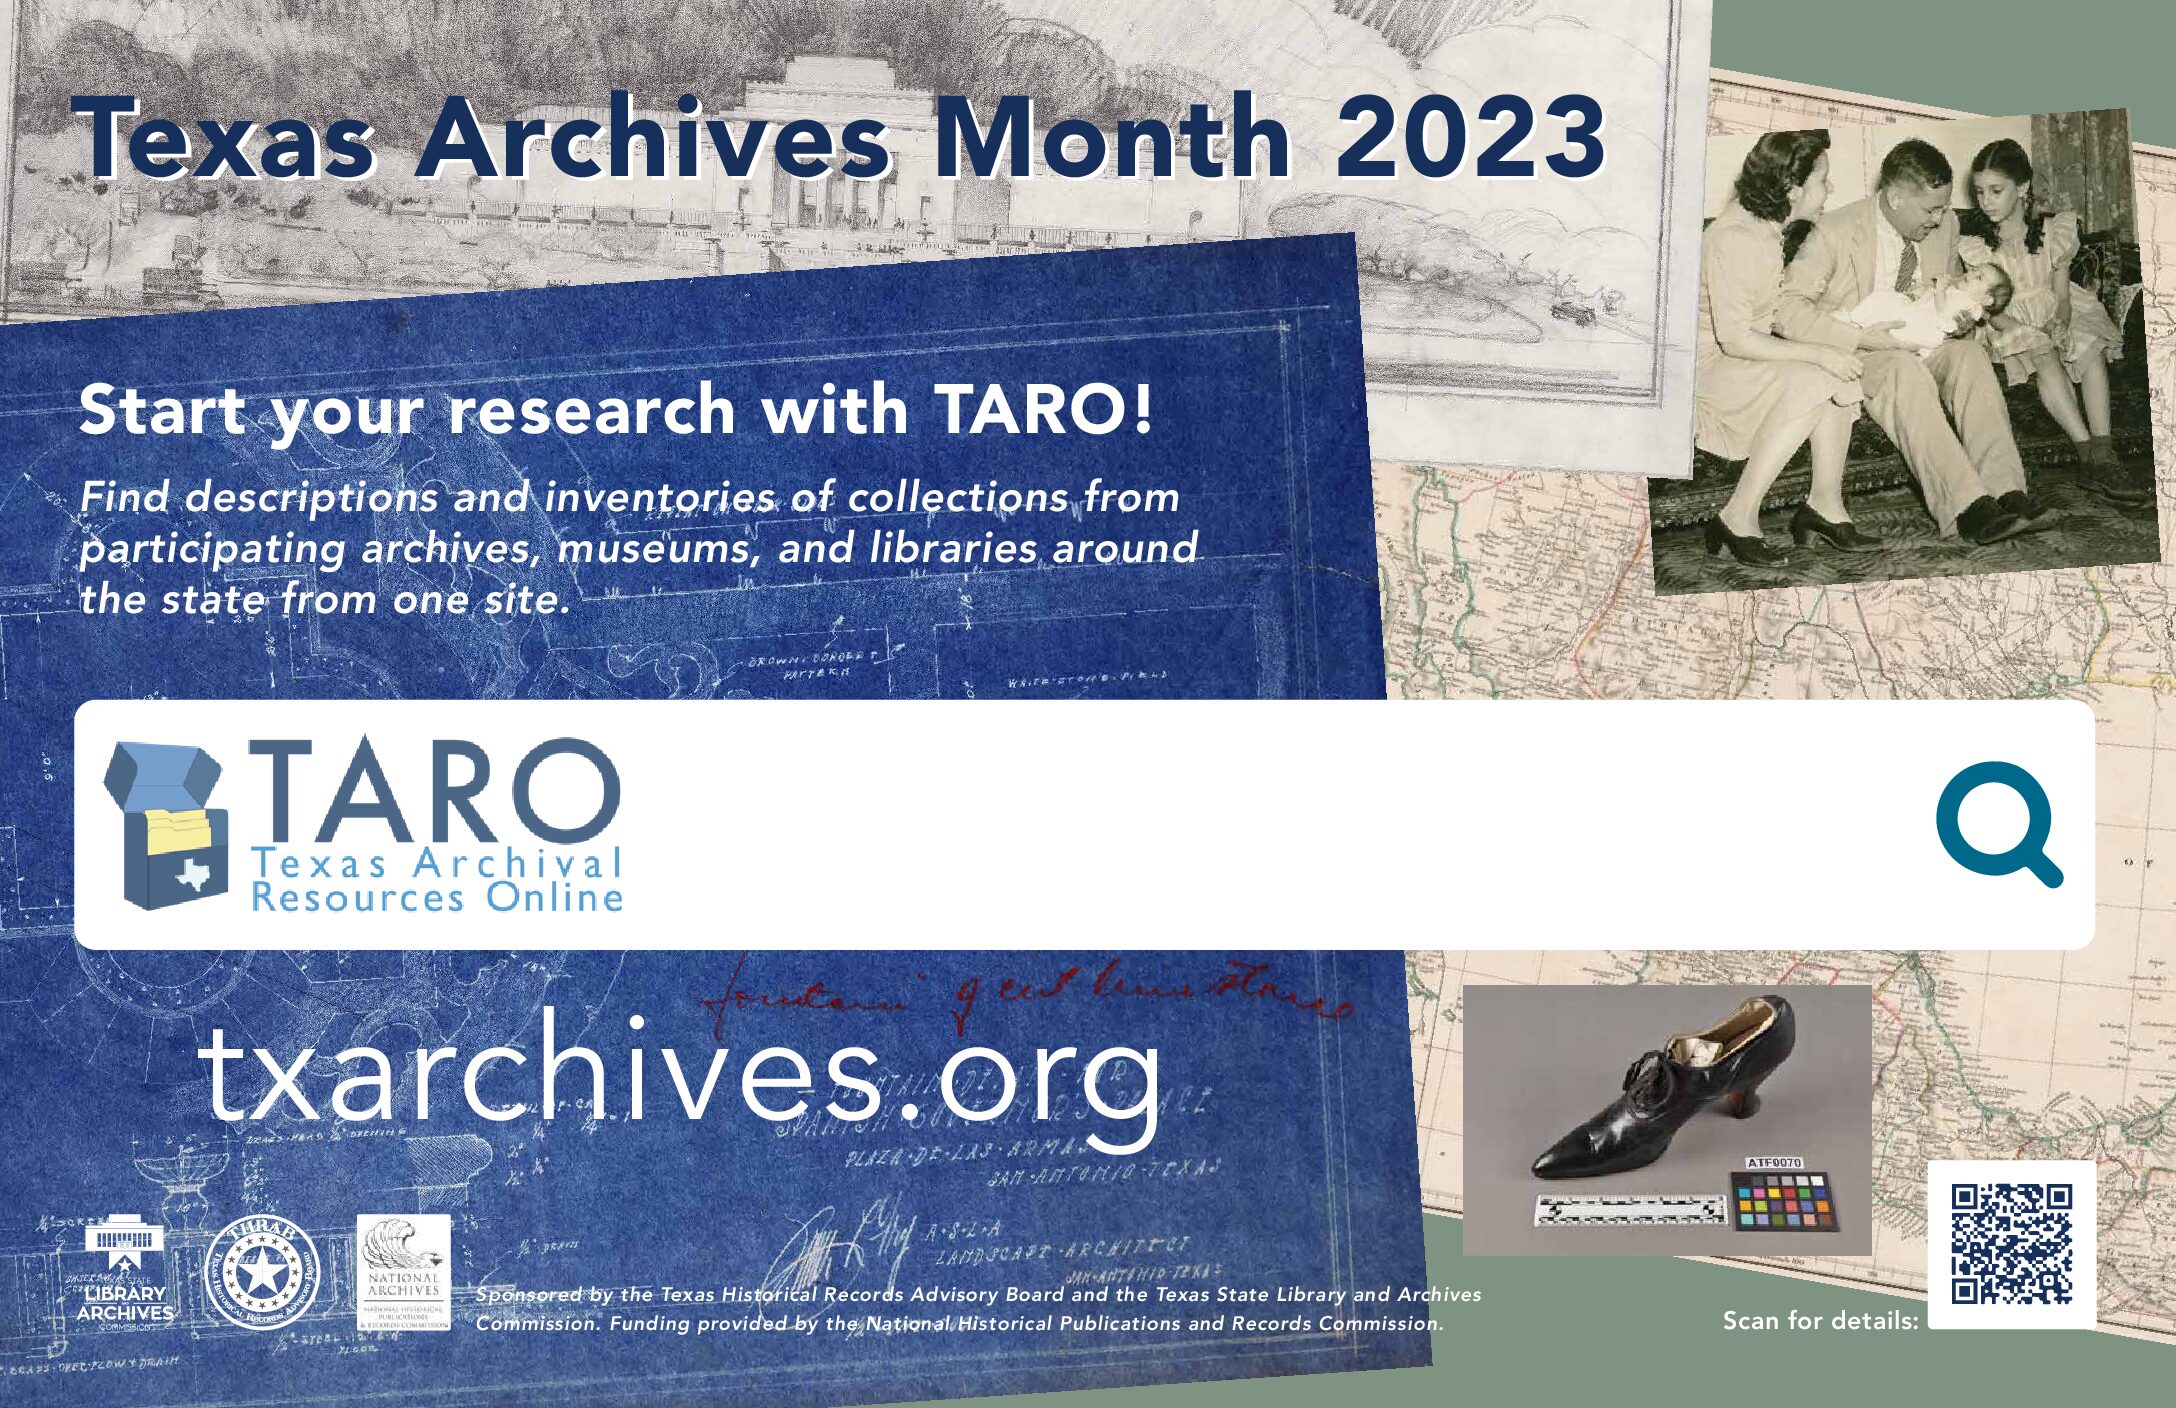 Archives Month and Texas Archival Resources Online